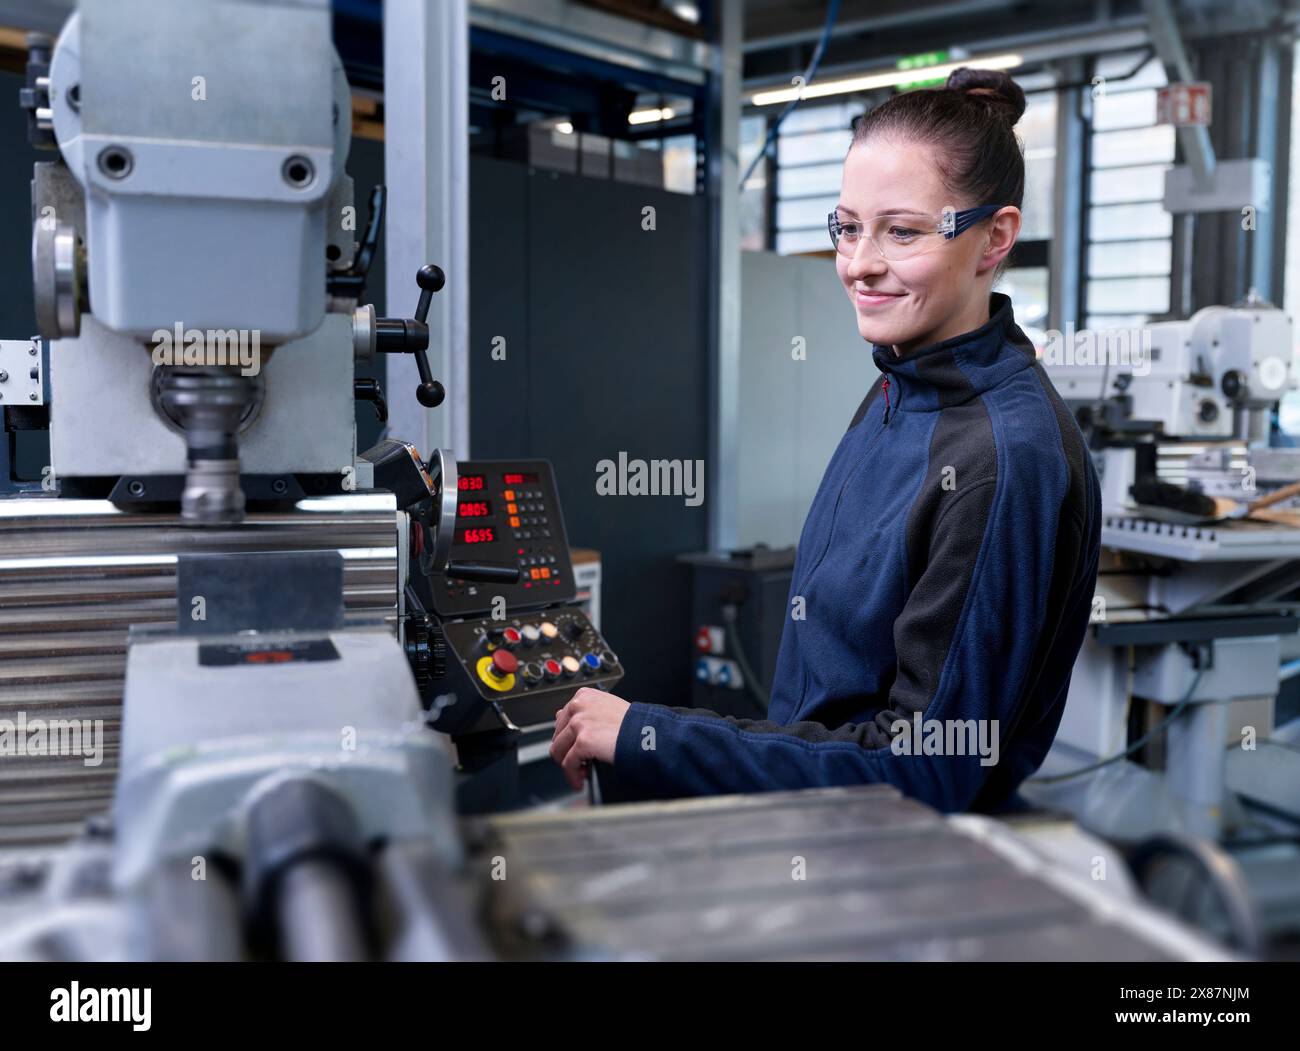 Smiling engineer with protective glasses operating CNC machine at factory Stock Photo